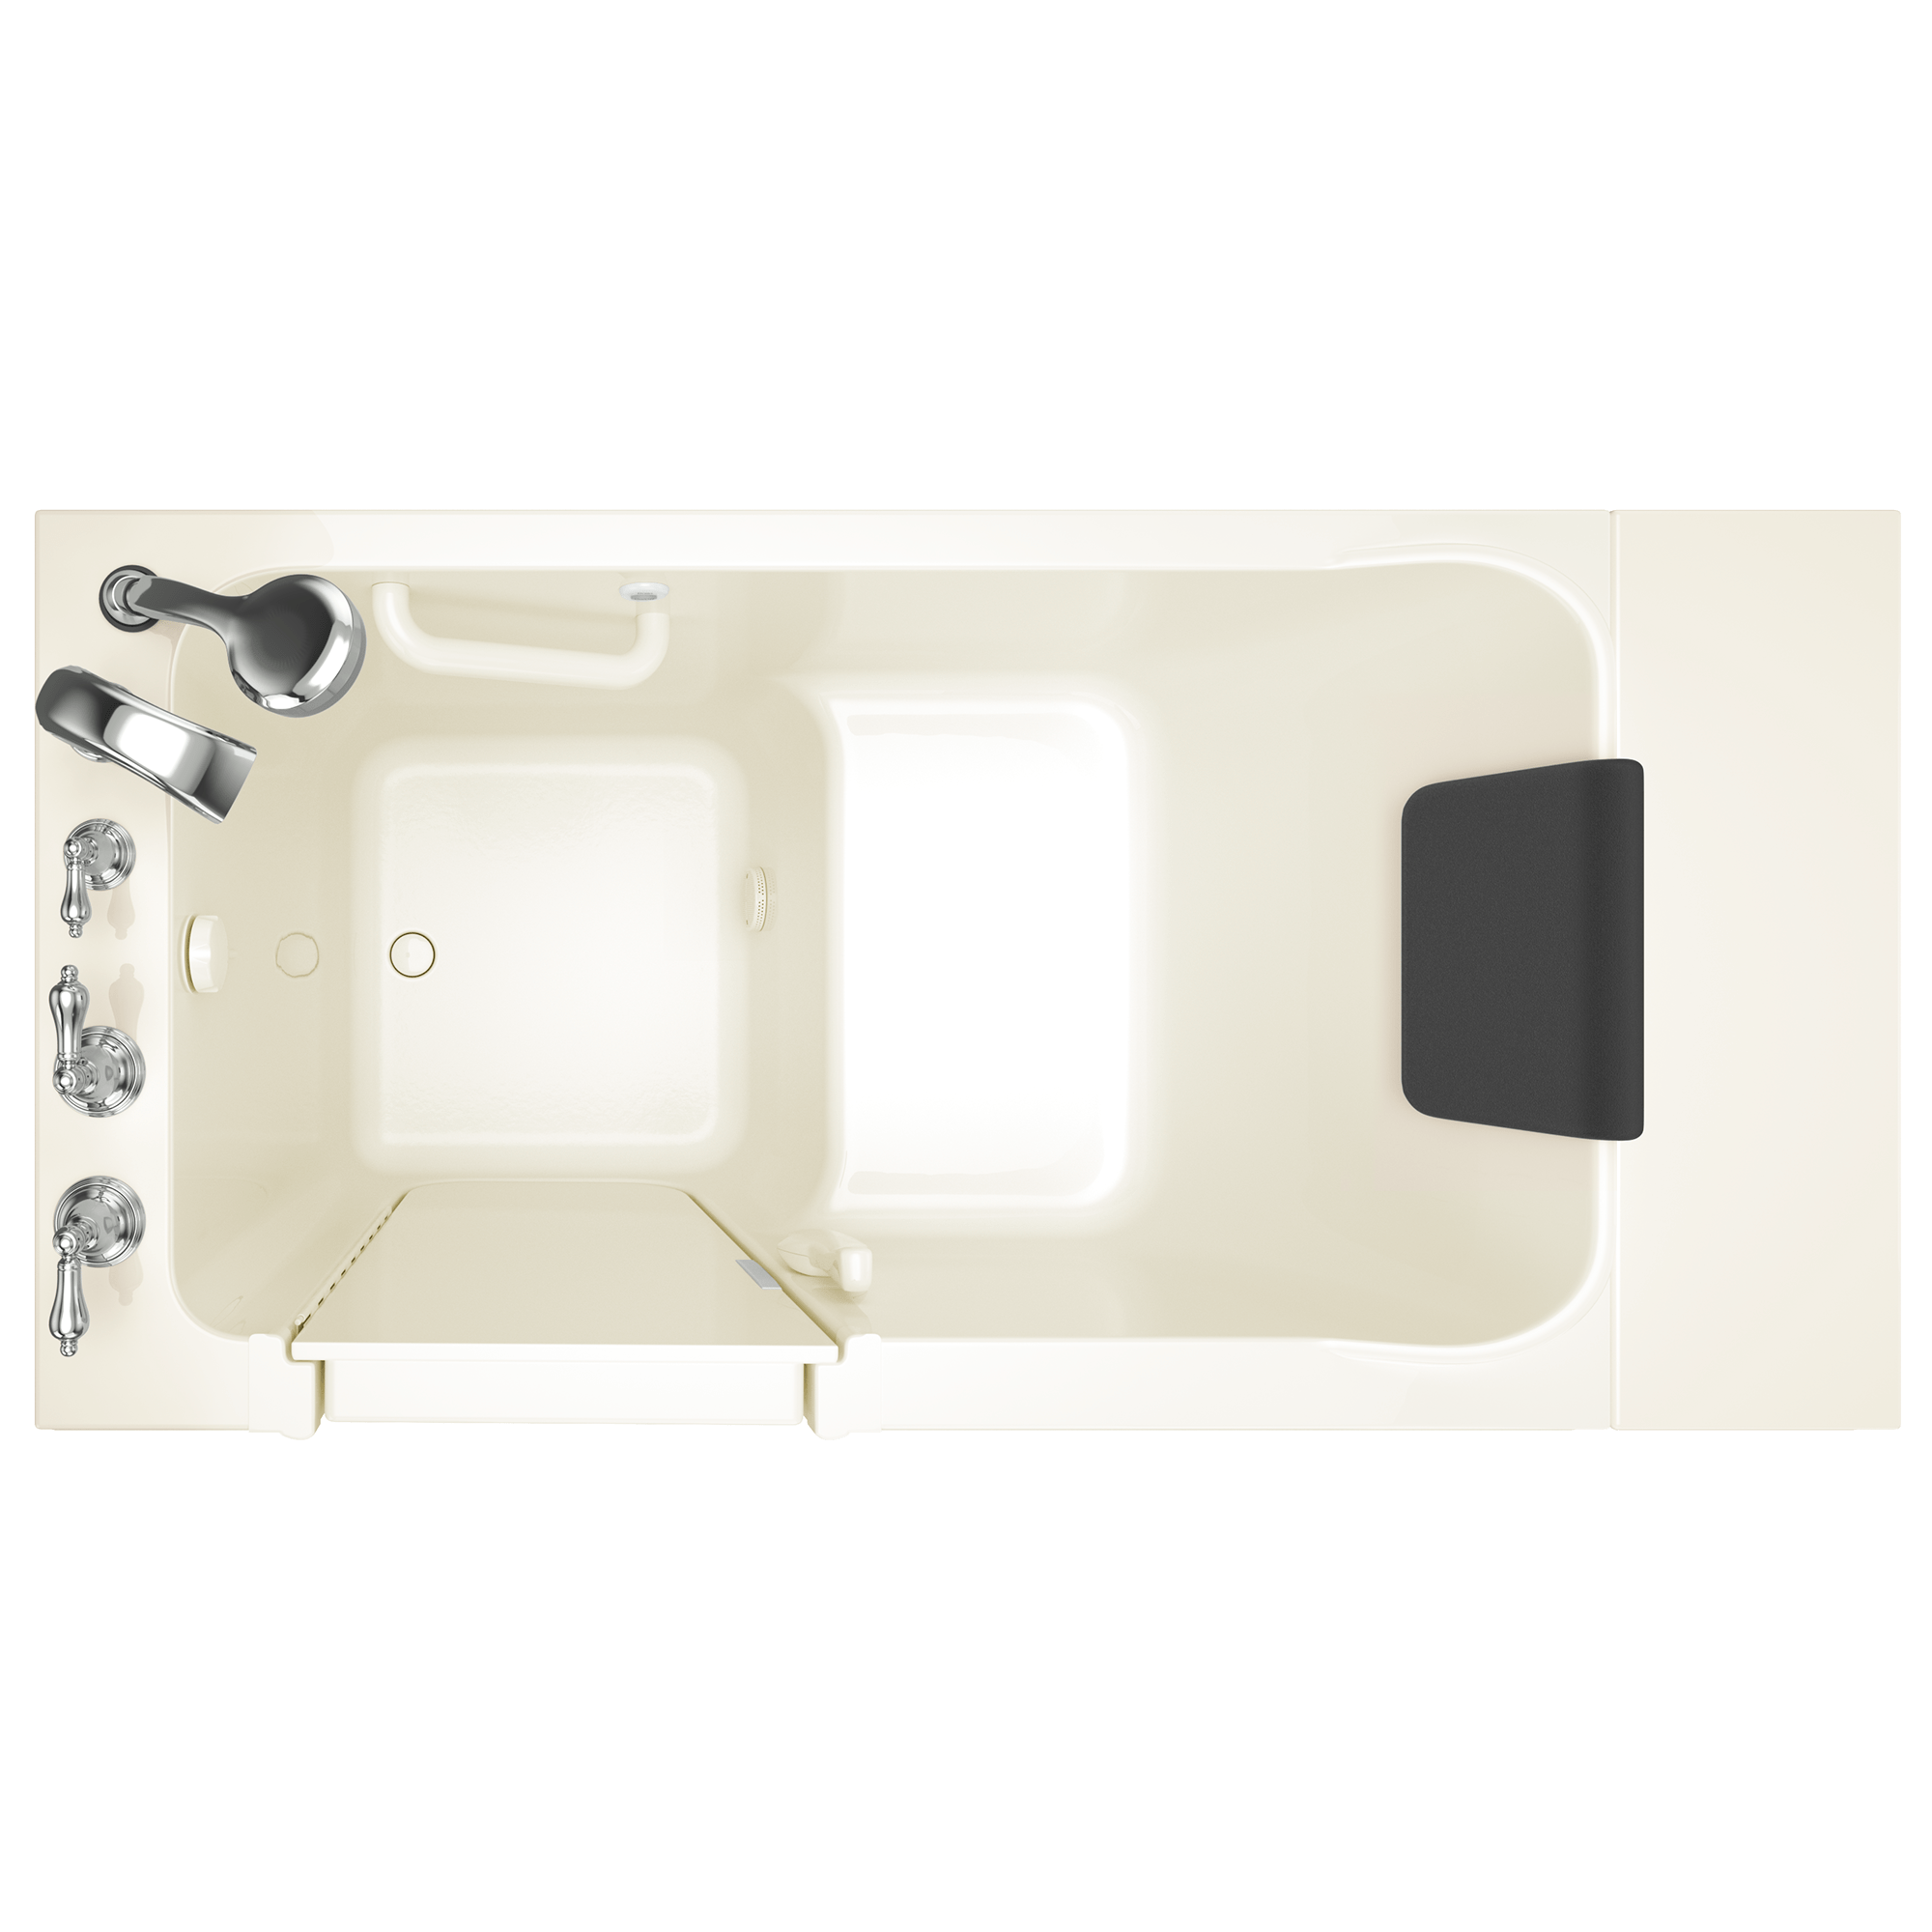 Acrylic Luxury Series 30 x 51 -Inch Walk-in Tub With Soaker System - Left-Hand Drain With Faucet